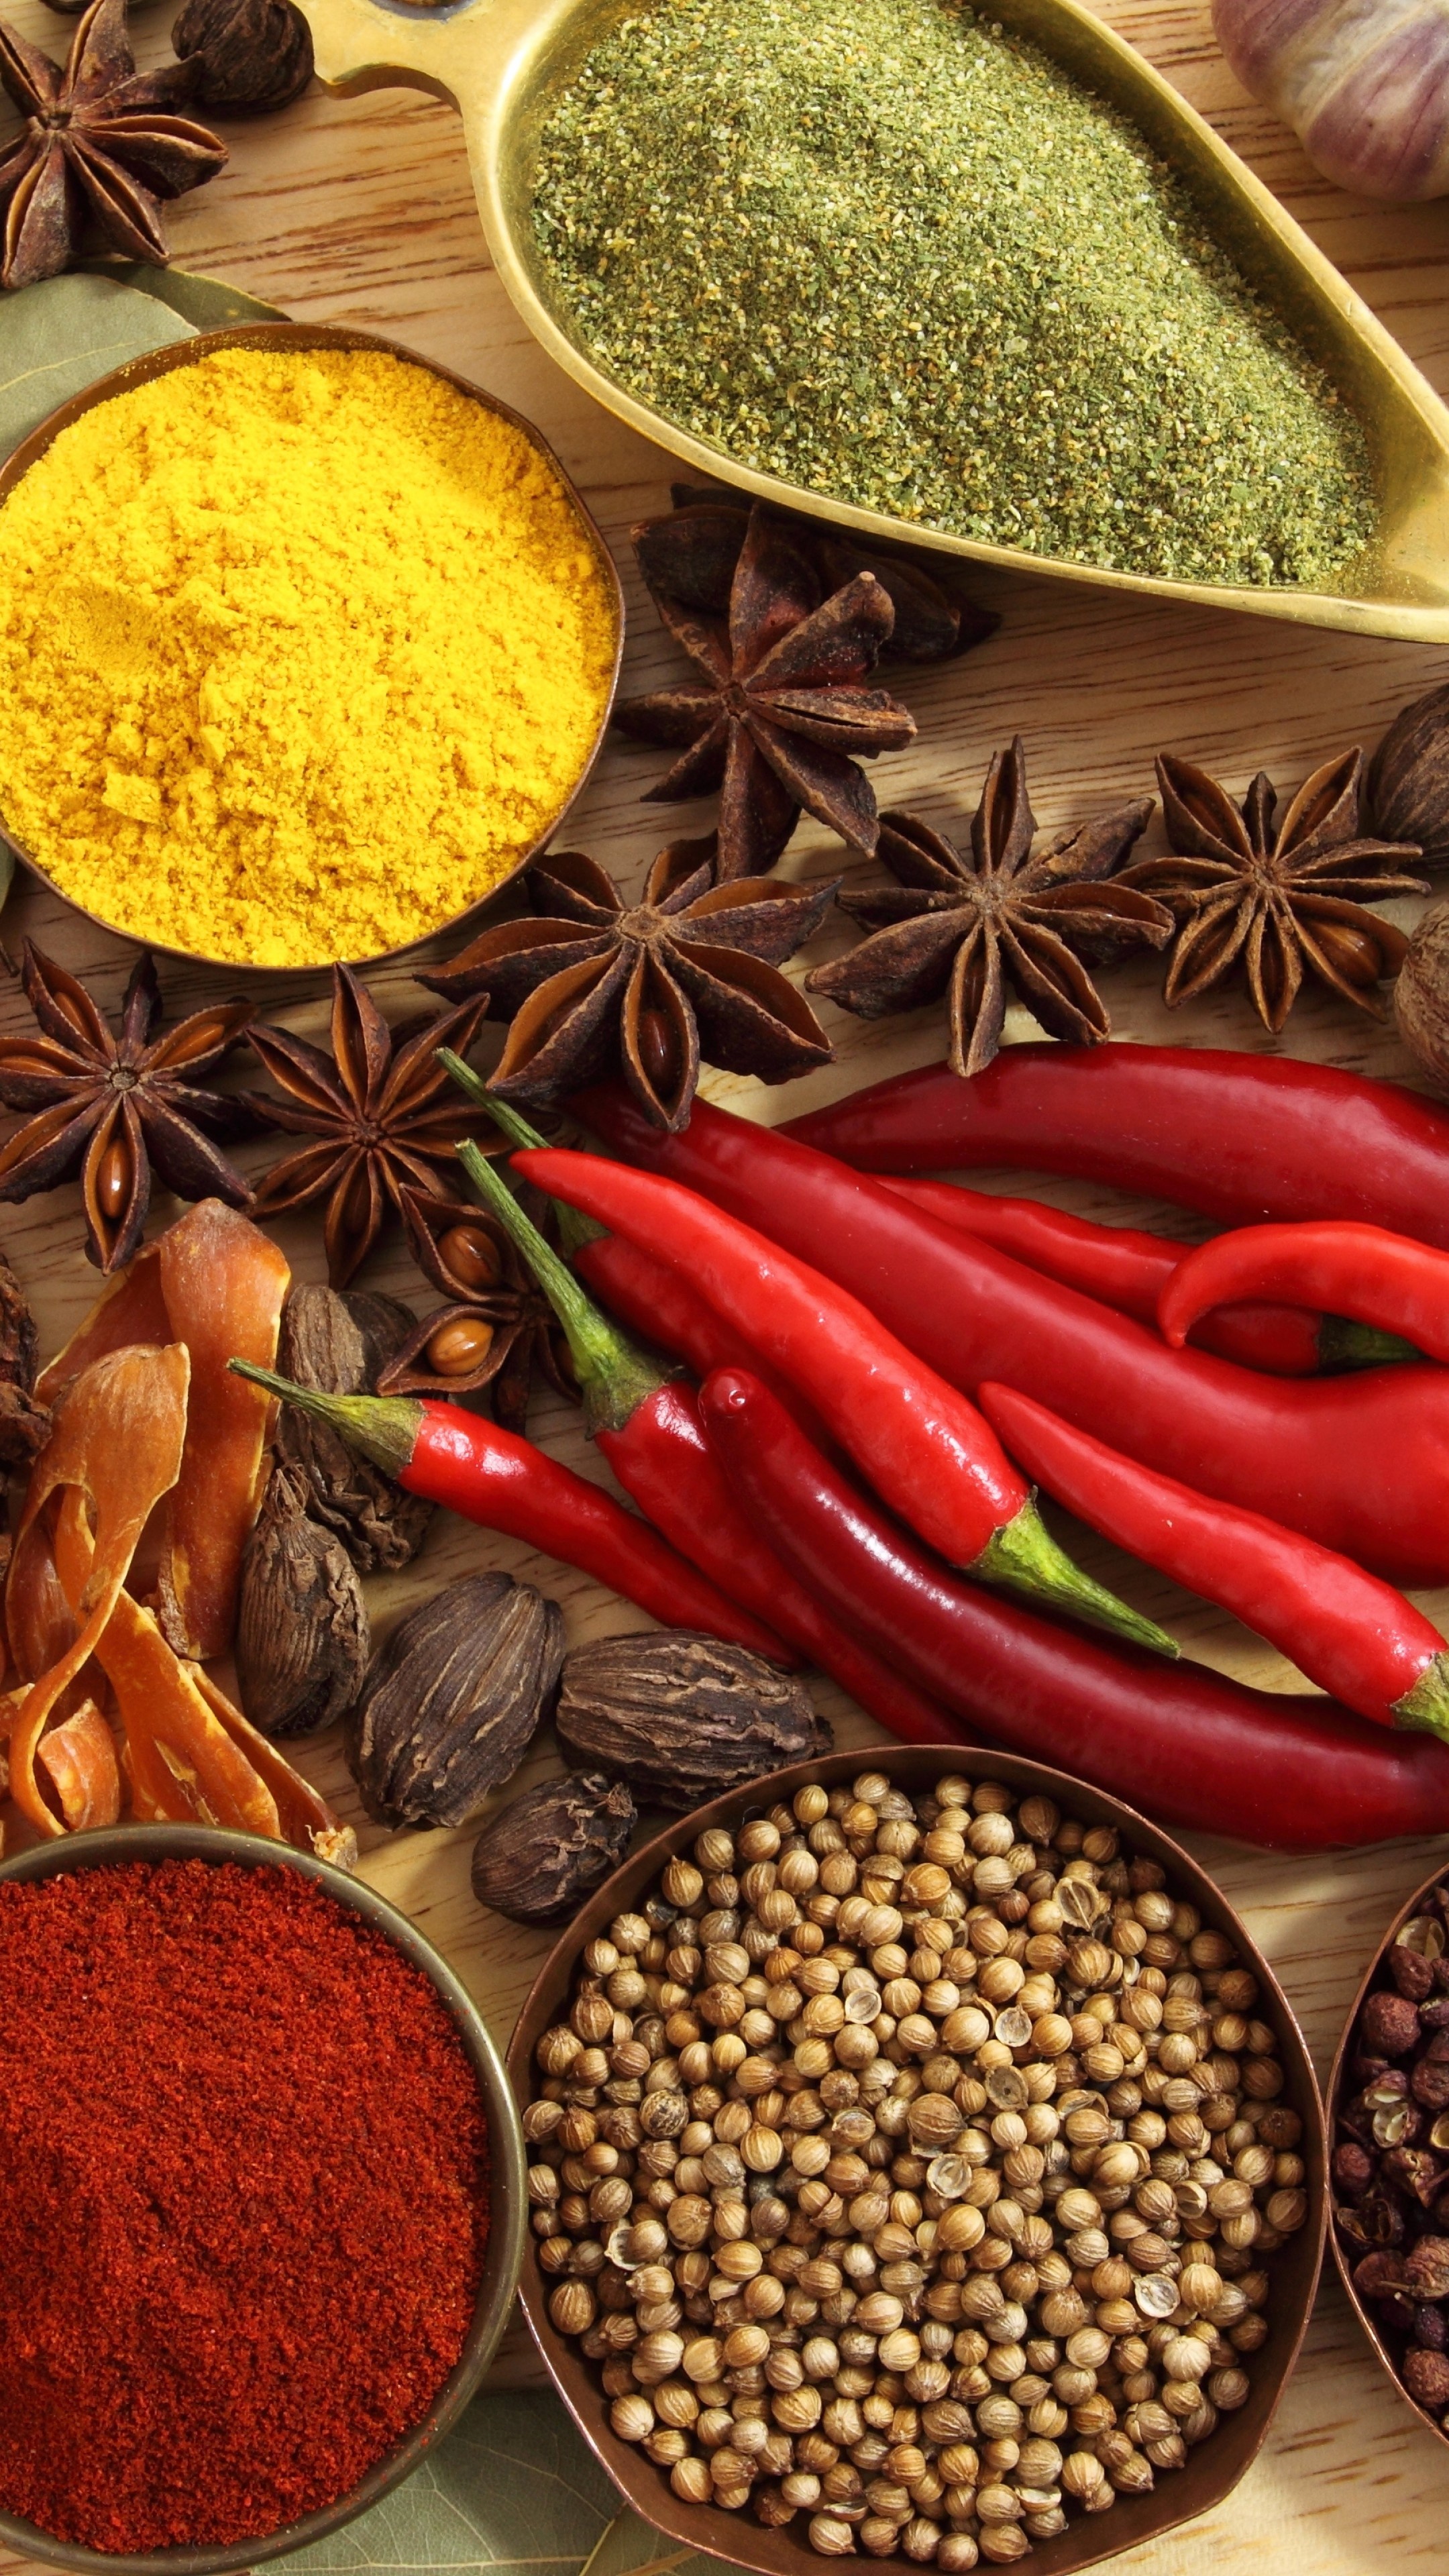 Aromatic spices, Pepper varieties, Spice rack essentials, Flavorful additions, 2160x3840 4K Phone